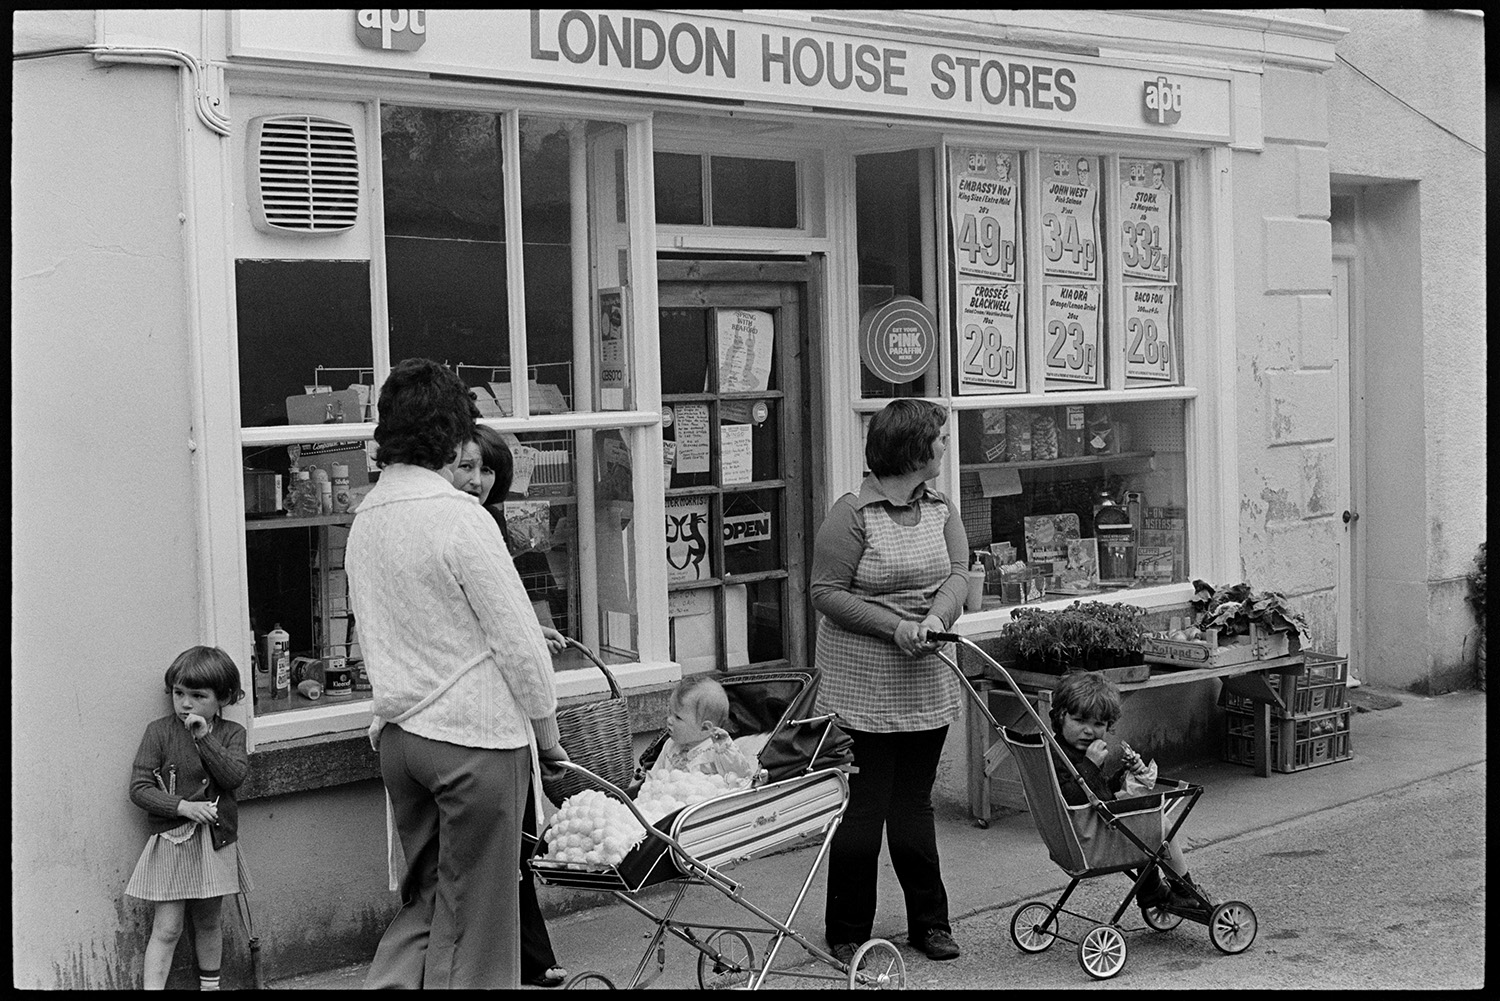 Mothers, women and children with prams outside shop. 
[Women with prams and children talking outside the shop front of London House Stores in Fore Street, Dolton. Various adverts can be seen in the shop window and vegetables are displayed outside.]